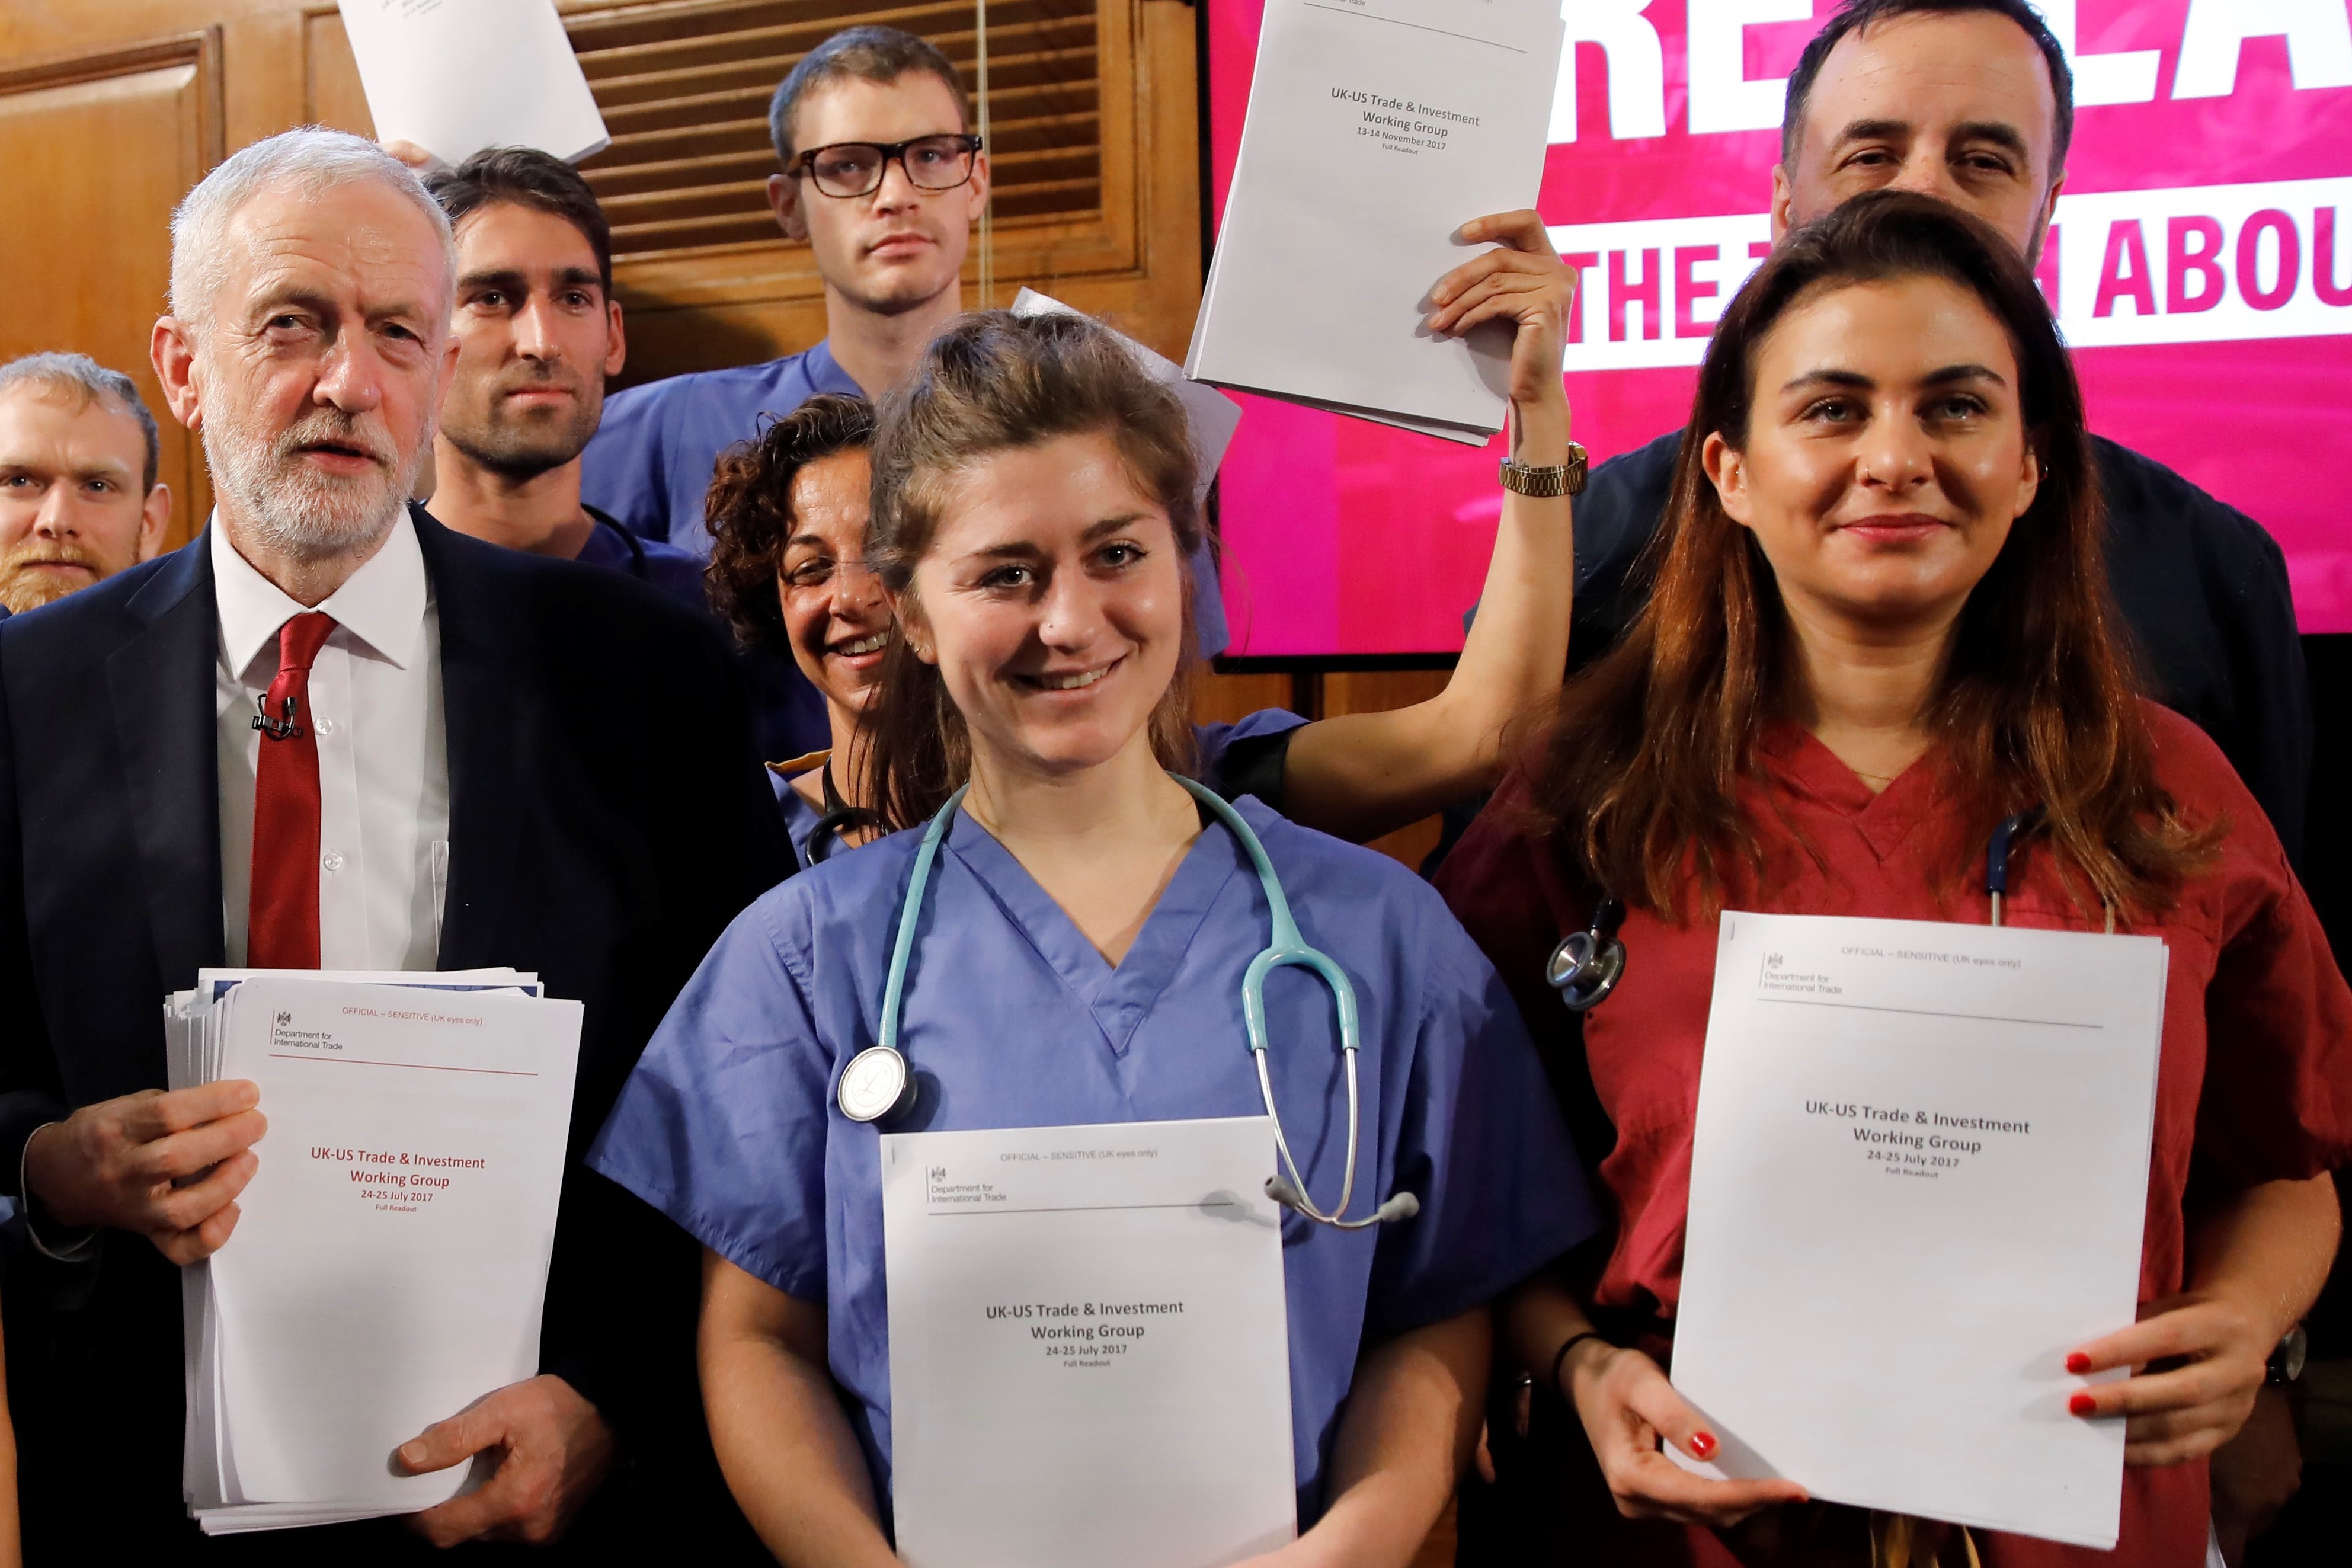 Opposition Labour party leader Jeremy Corbyn (C) poses with NHS workers holding documents regarding the Conservative government's UK-US trade talks in London after a press conference on November 27, 2019.